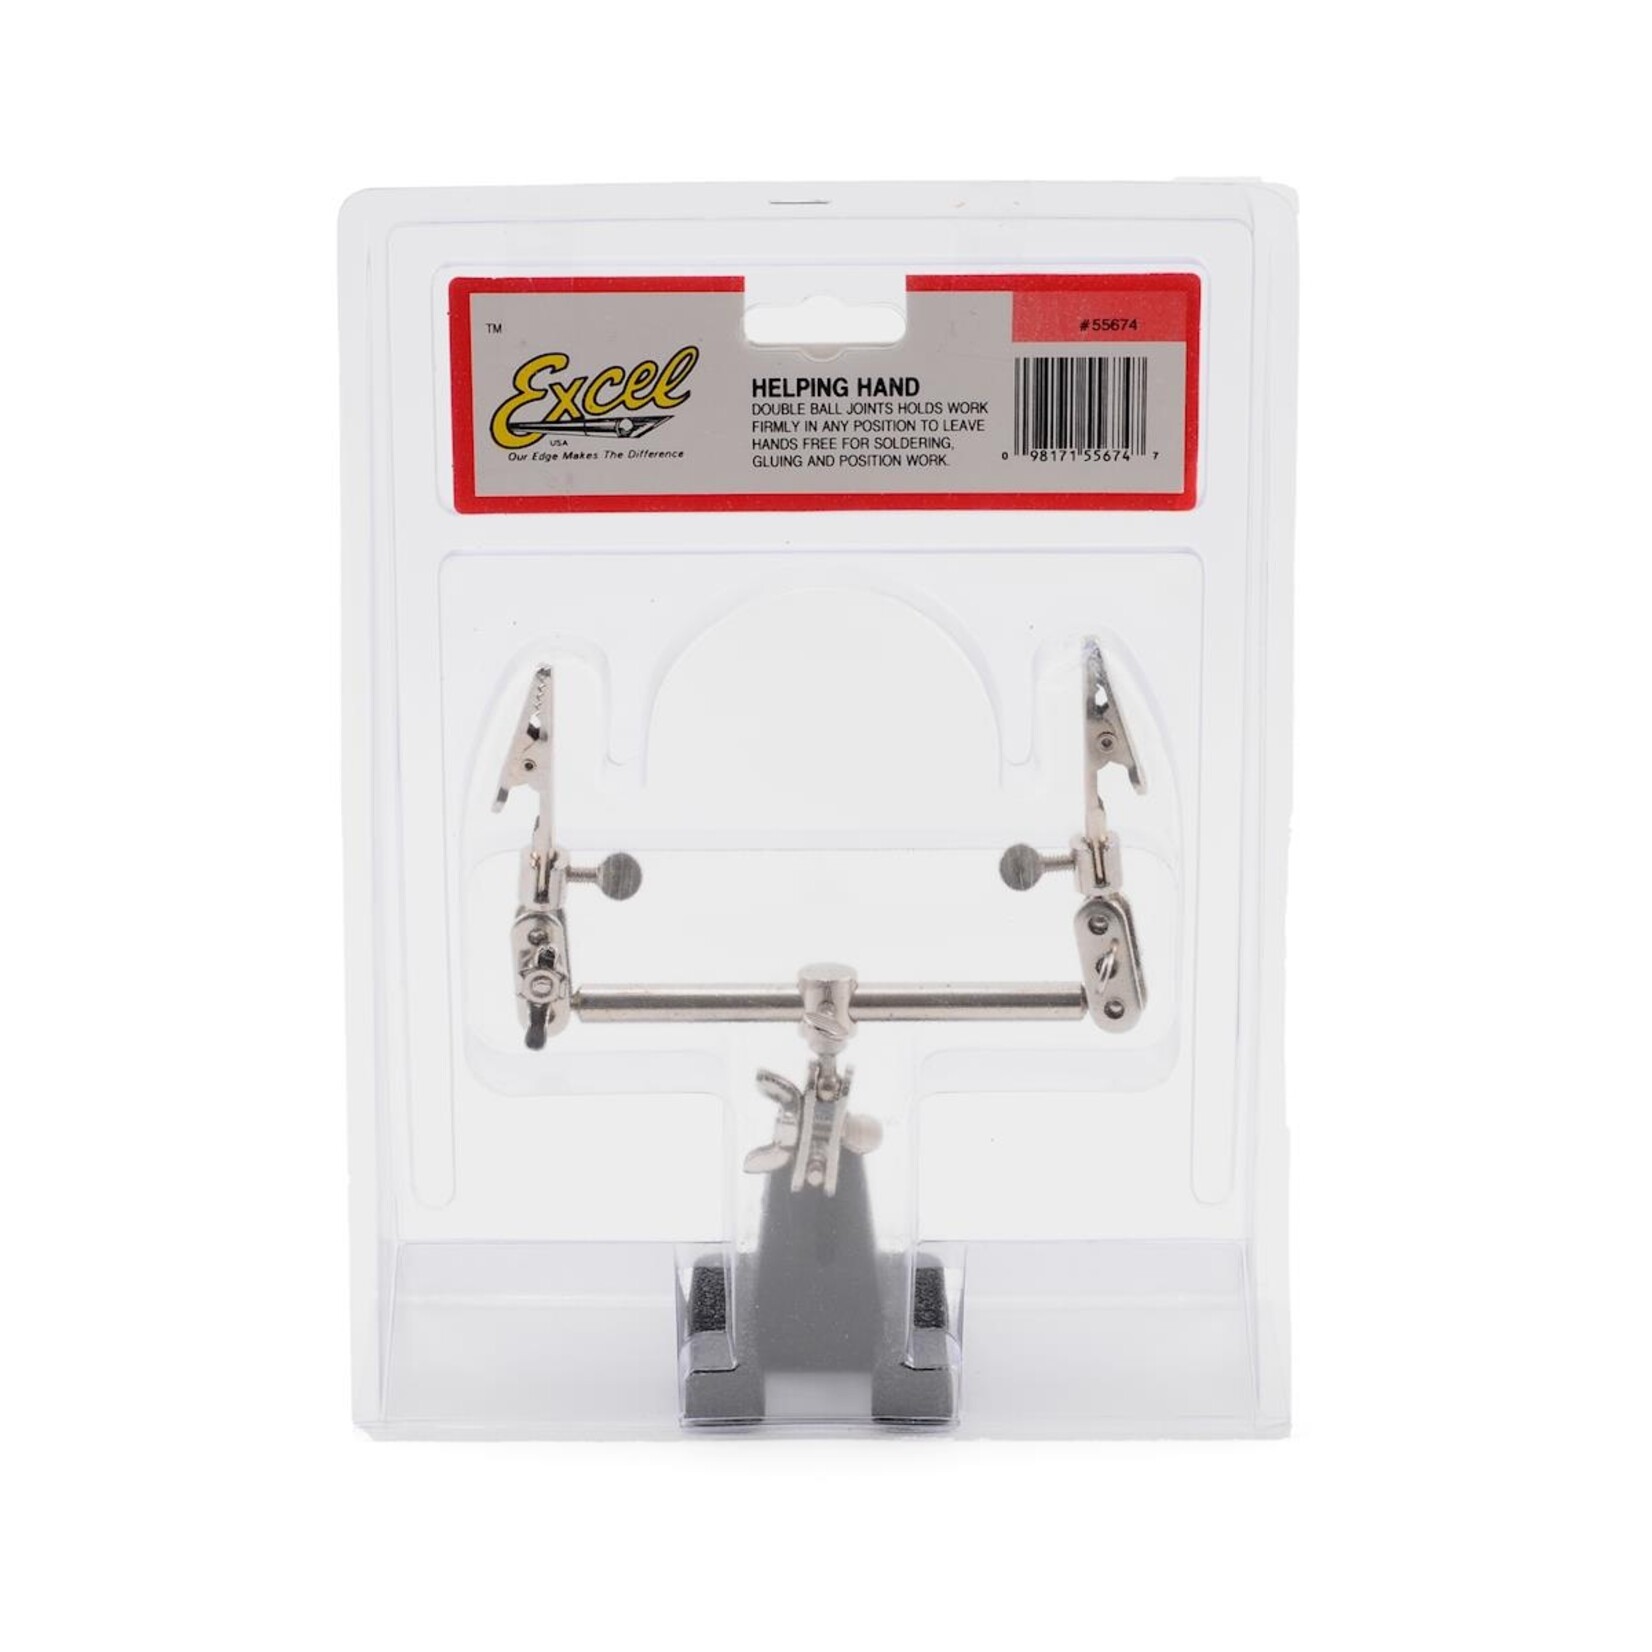 Excel Excel Extra Hands Double Clip #55674